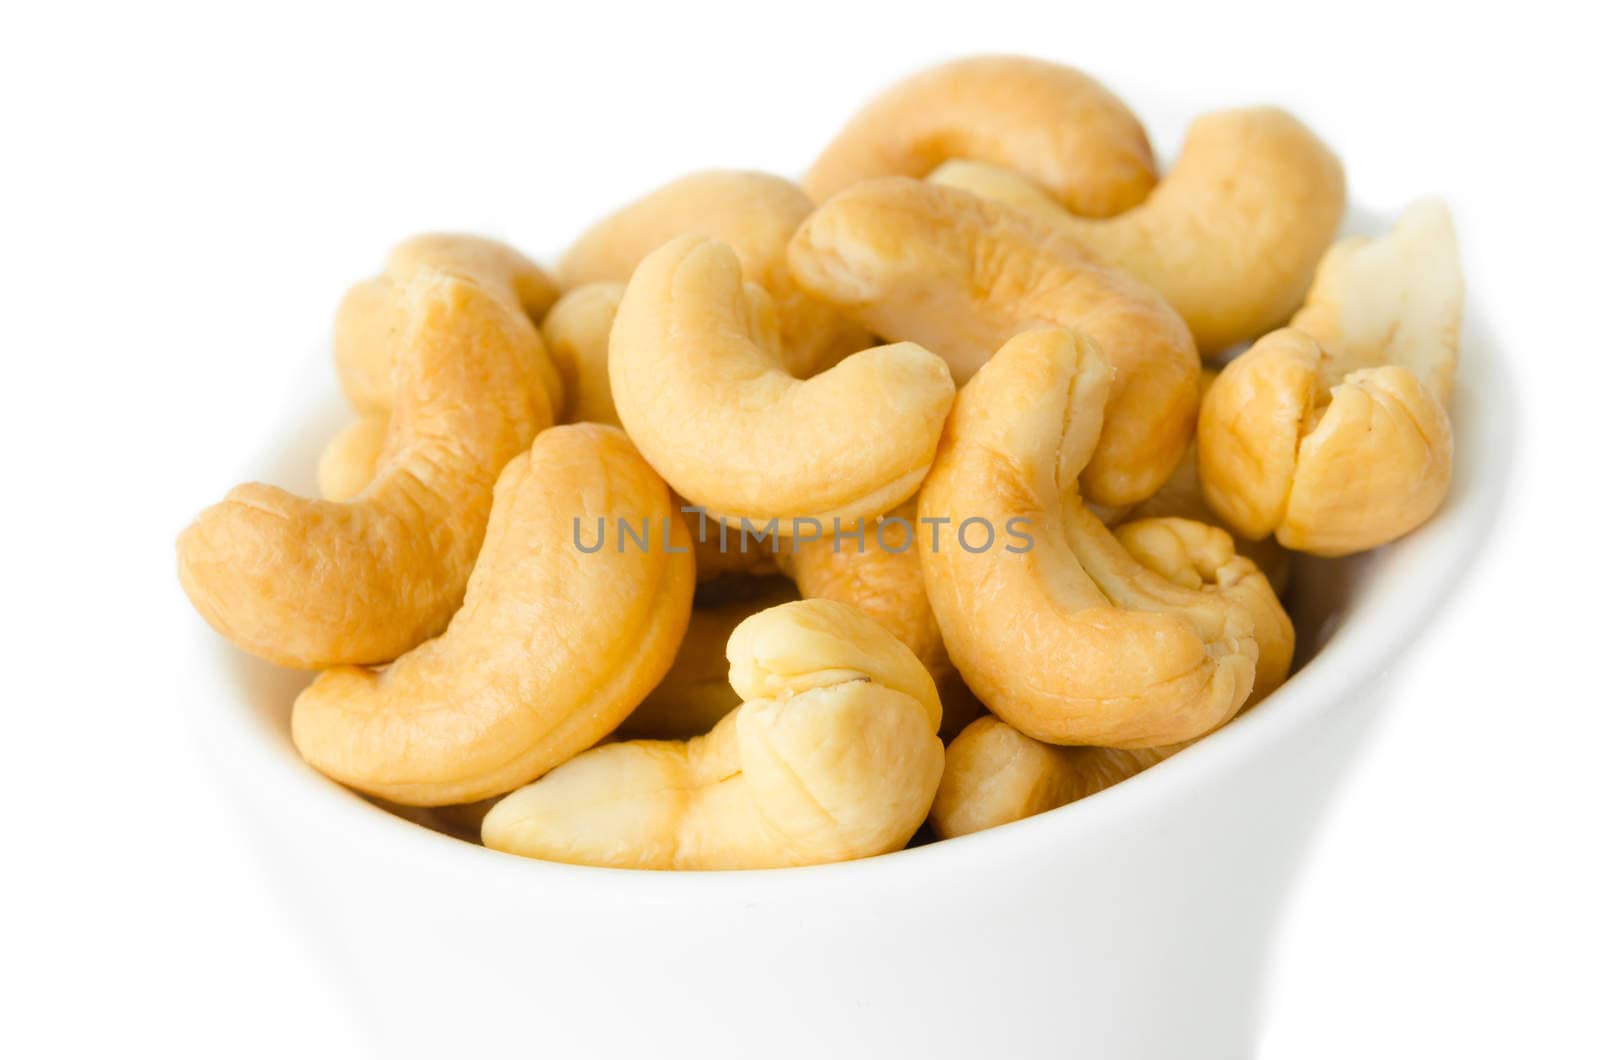 Cashew nuts in a white bowl. by Gamjai